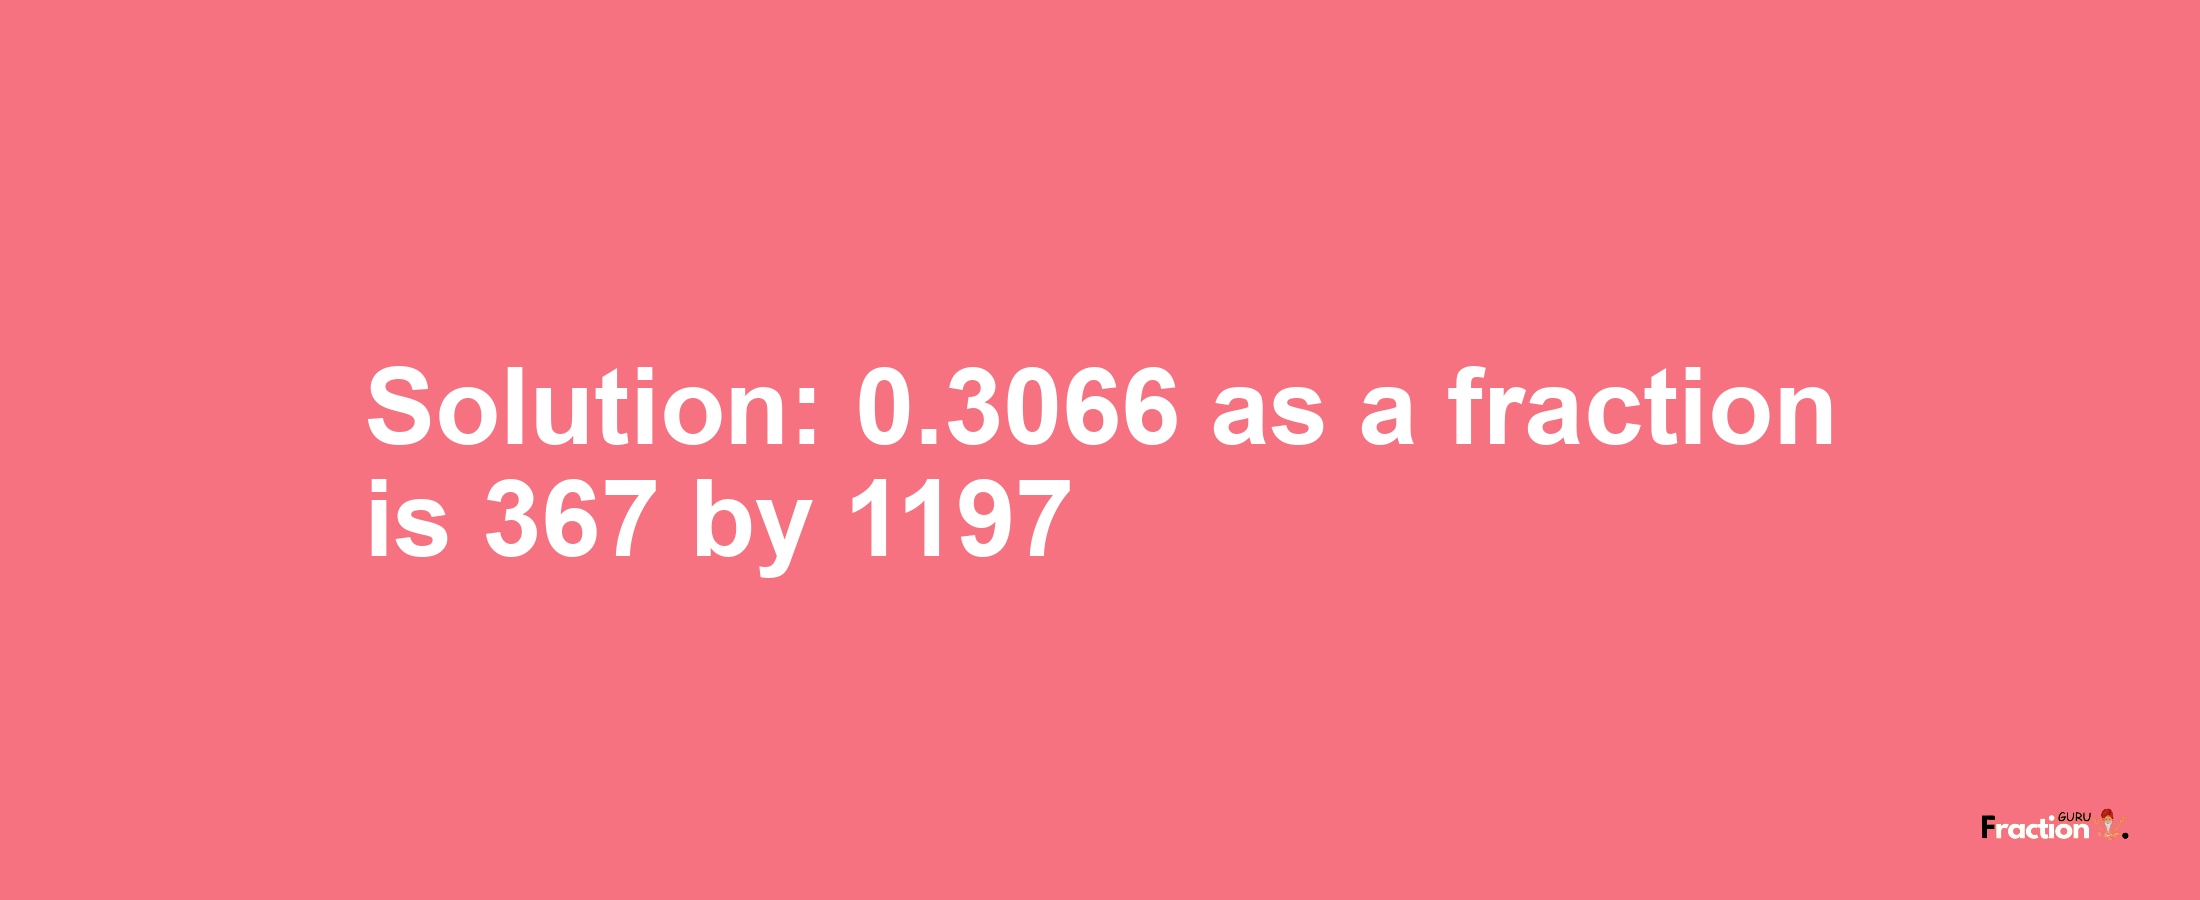 Solution:0.3066 as a fraction is 367/1197